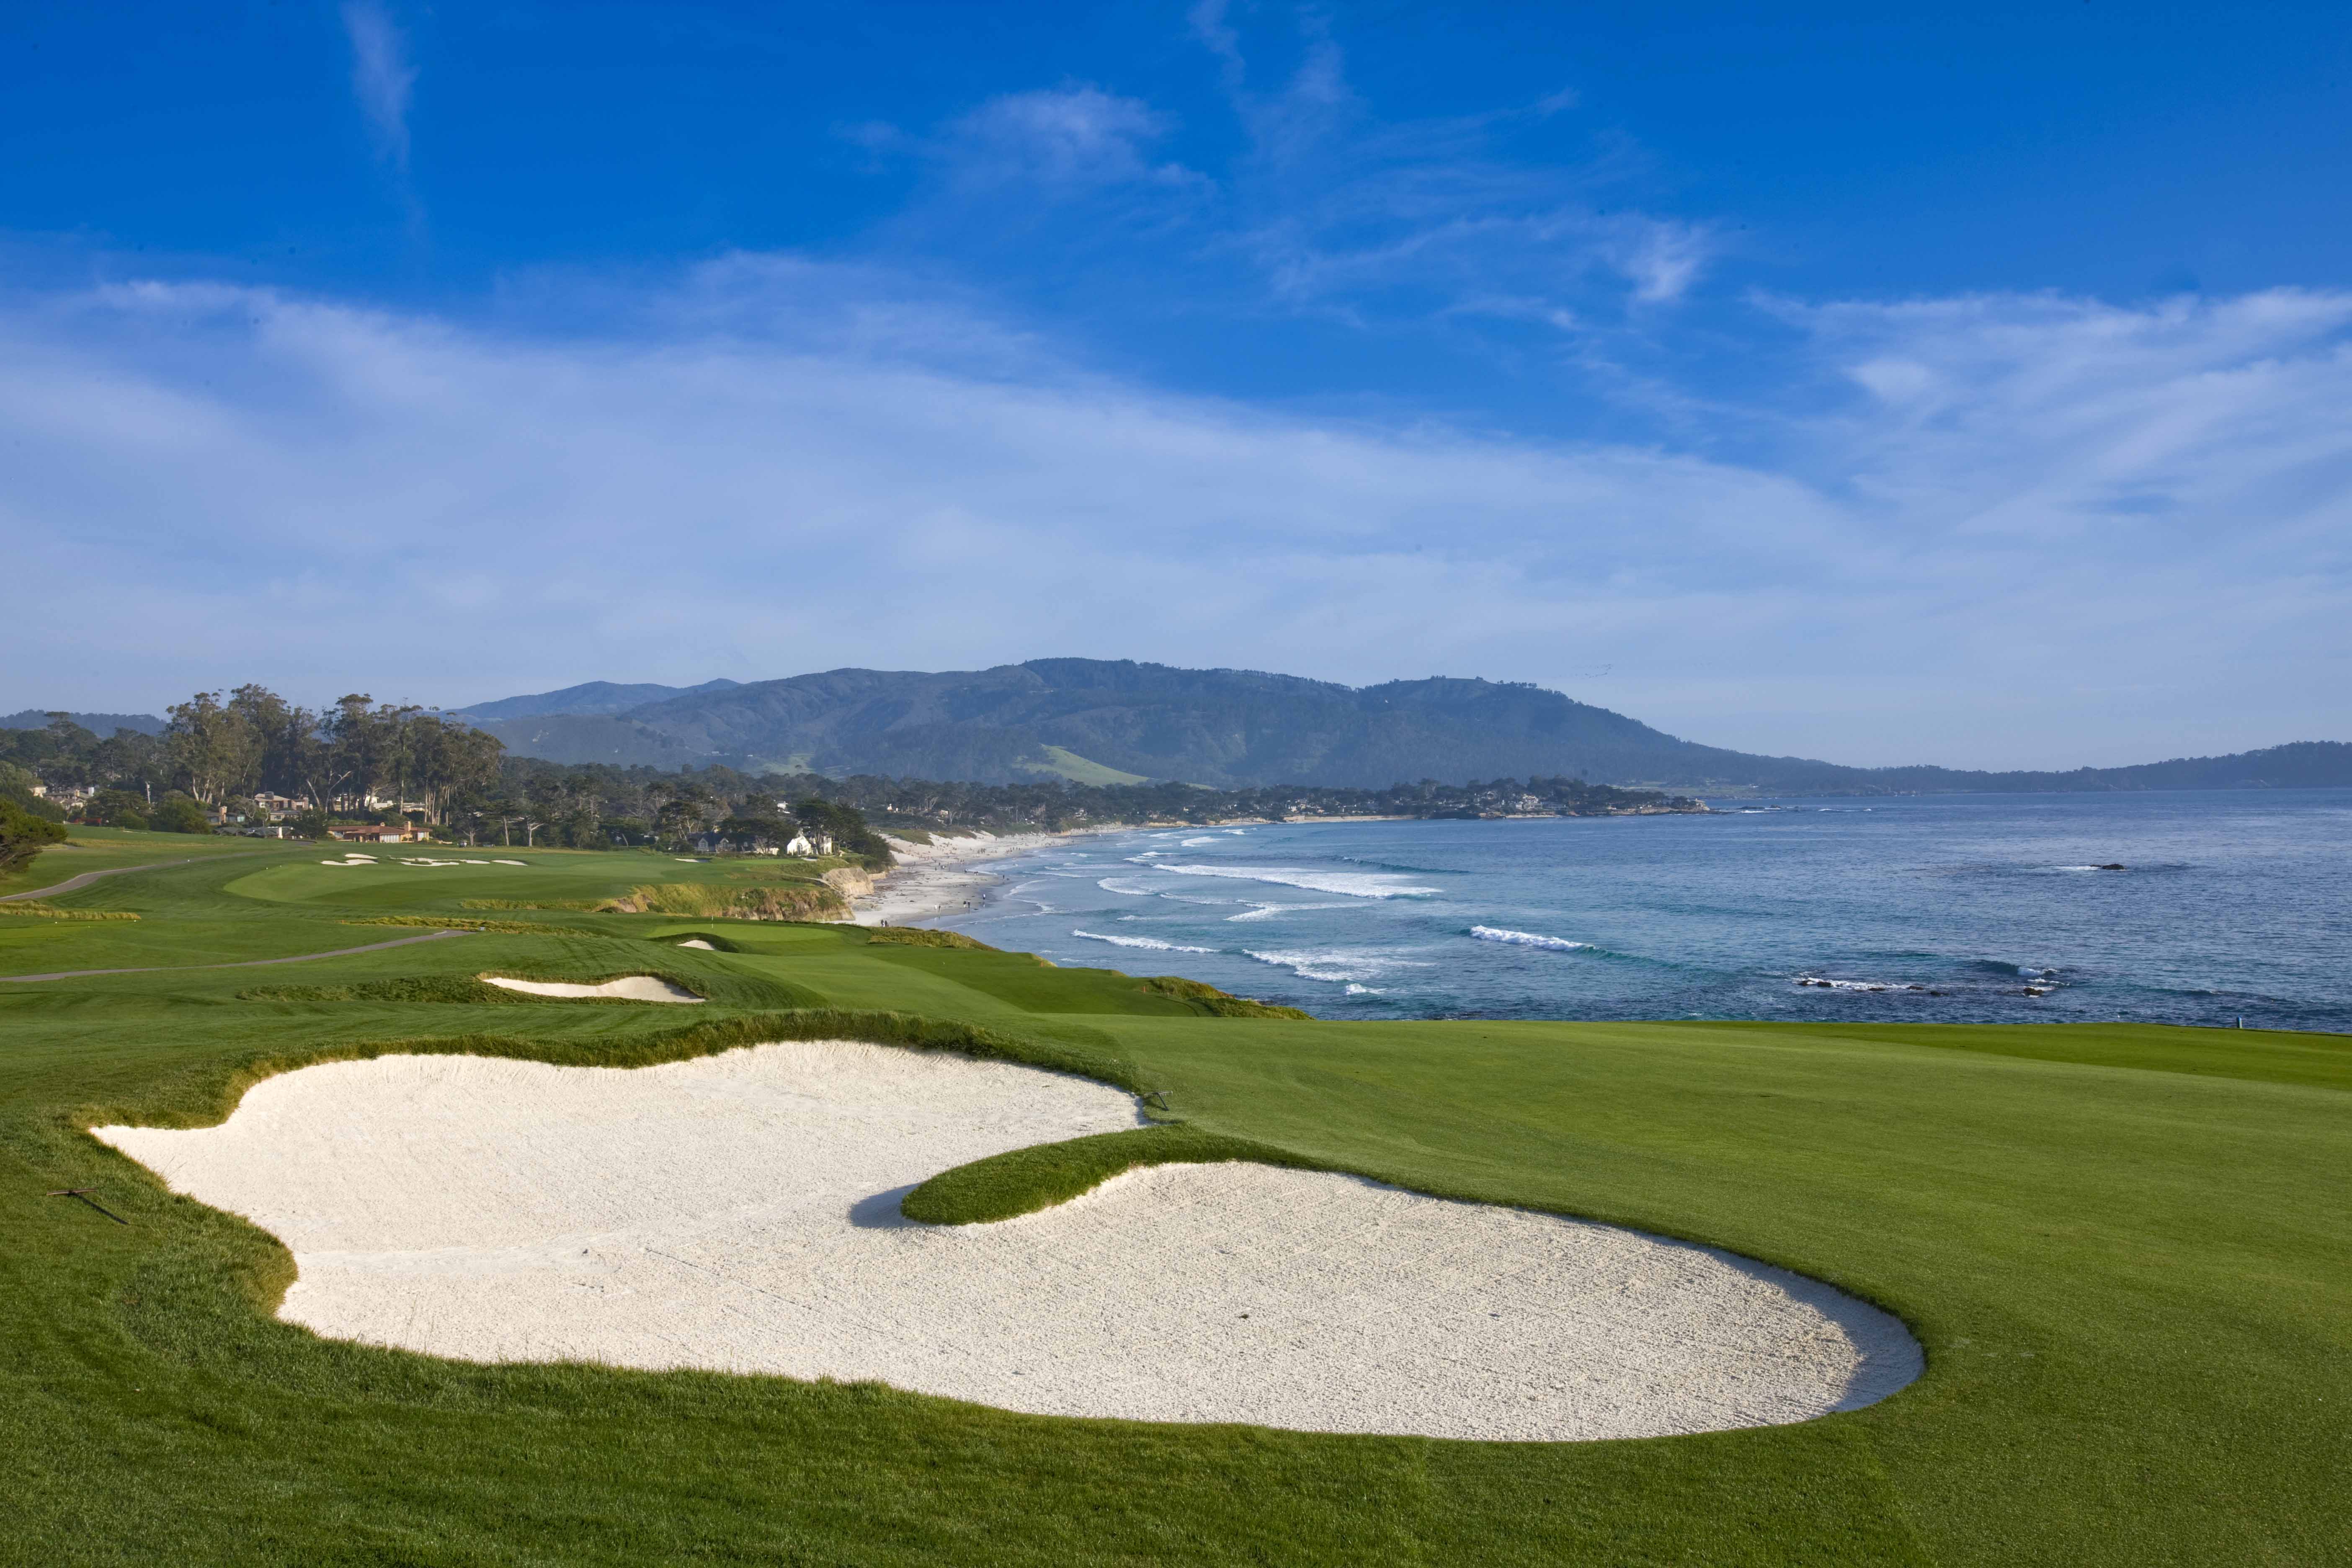 10 Pebble Beach Golf Course Zoom Background Wallpaper Ideas The Zoom ...